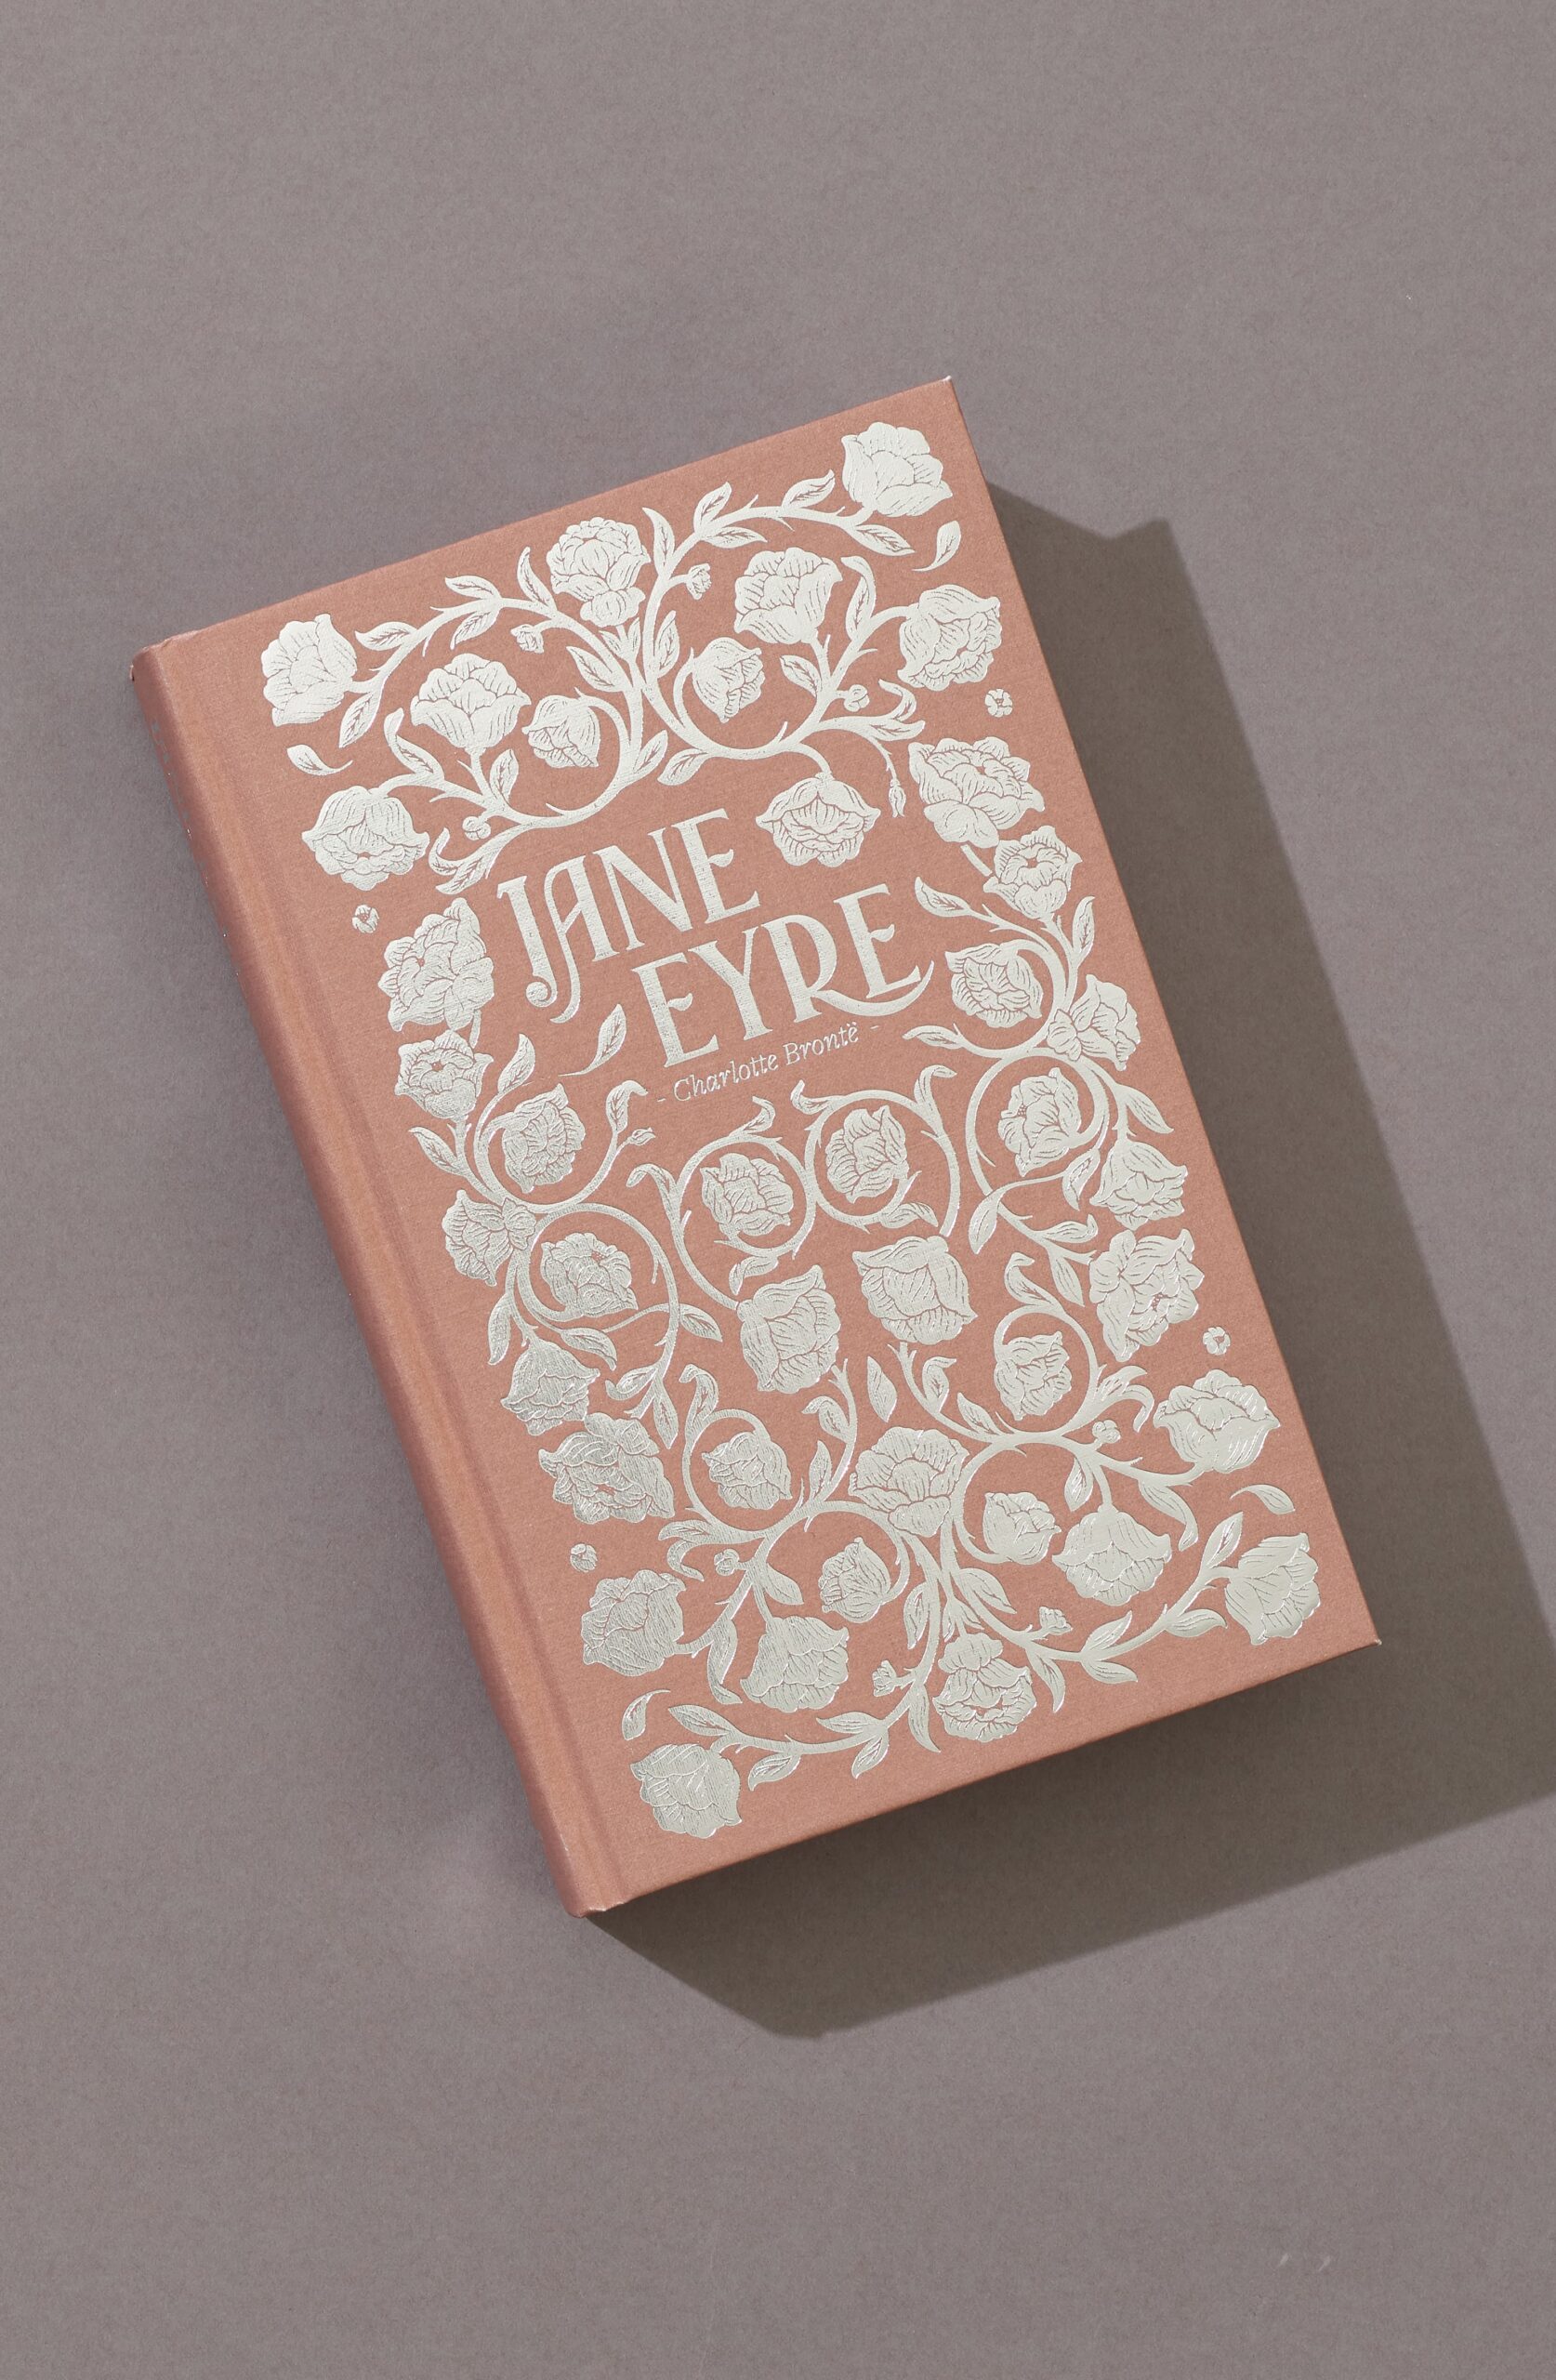 Jane Eyre Luxe cover